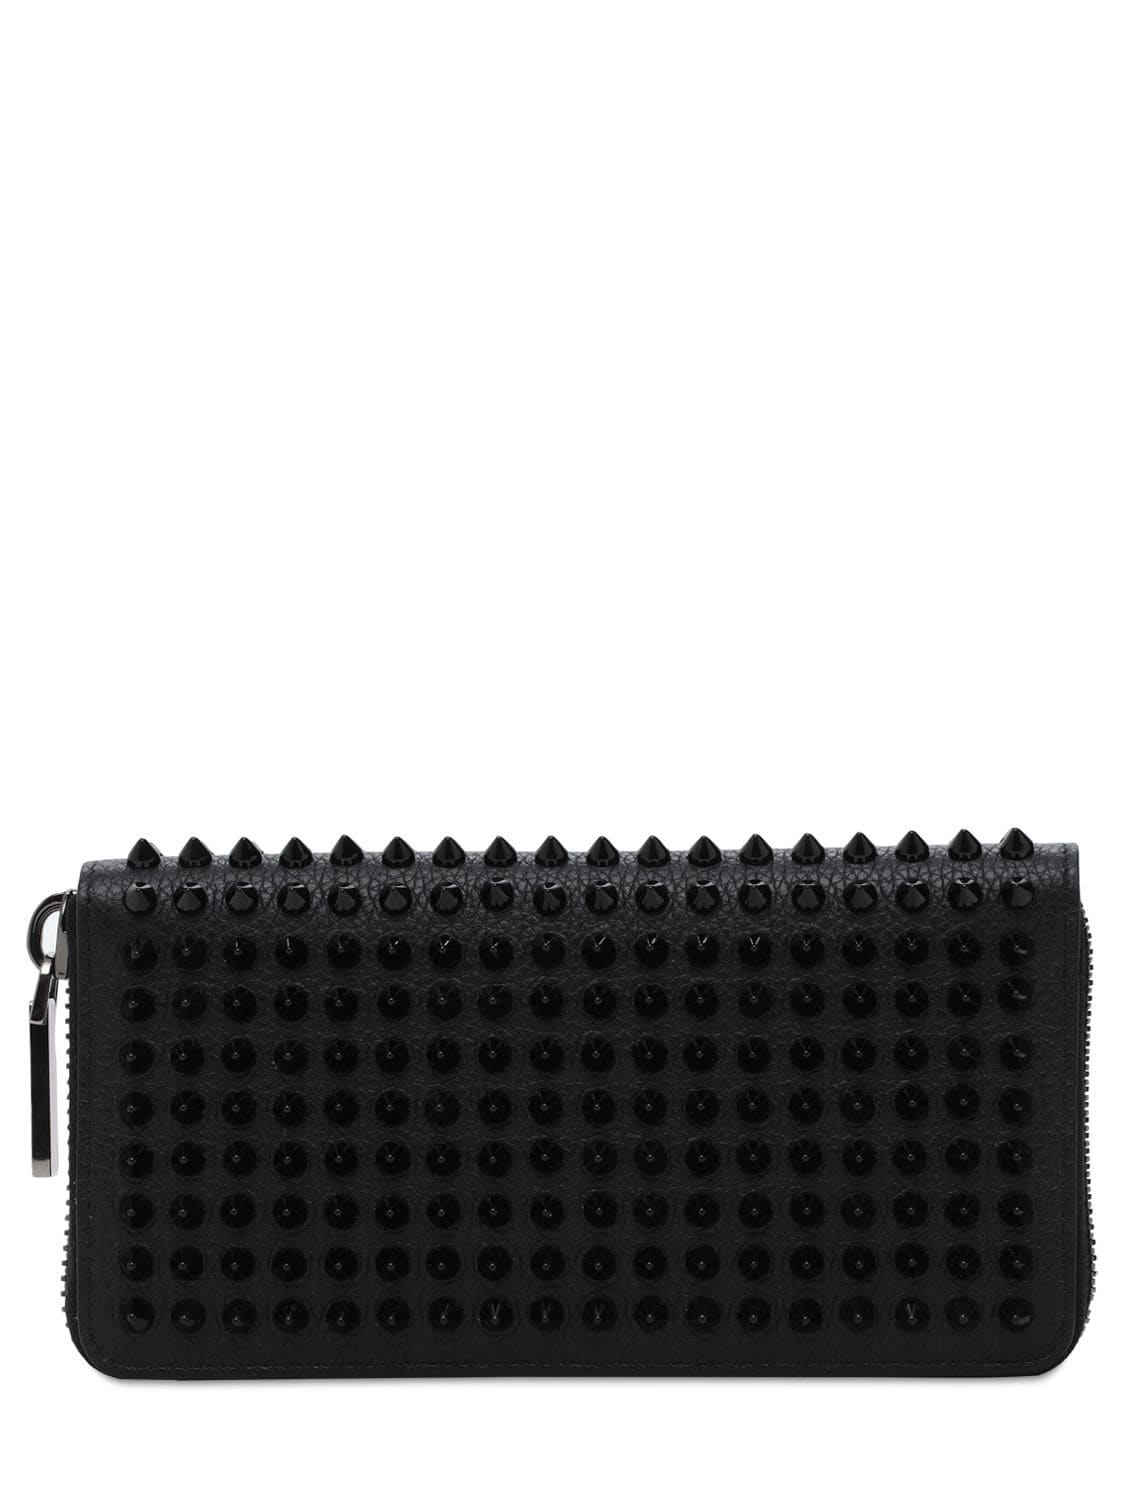 Shop Christian Louboutin Panettone Spiked Leather Zip Wallet In Black